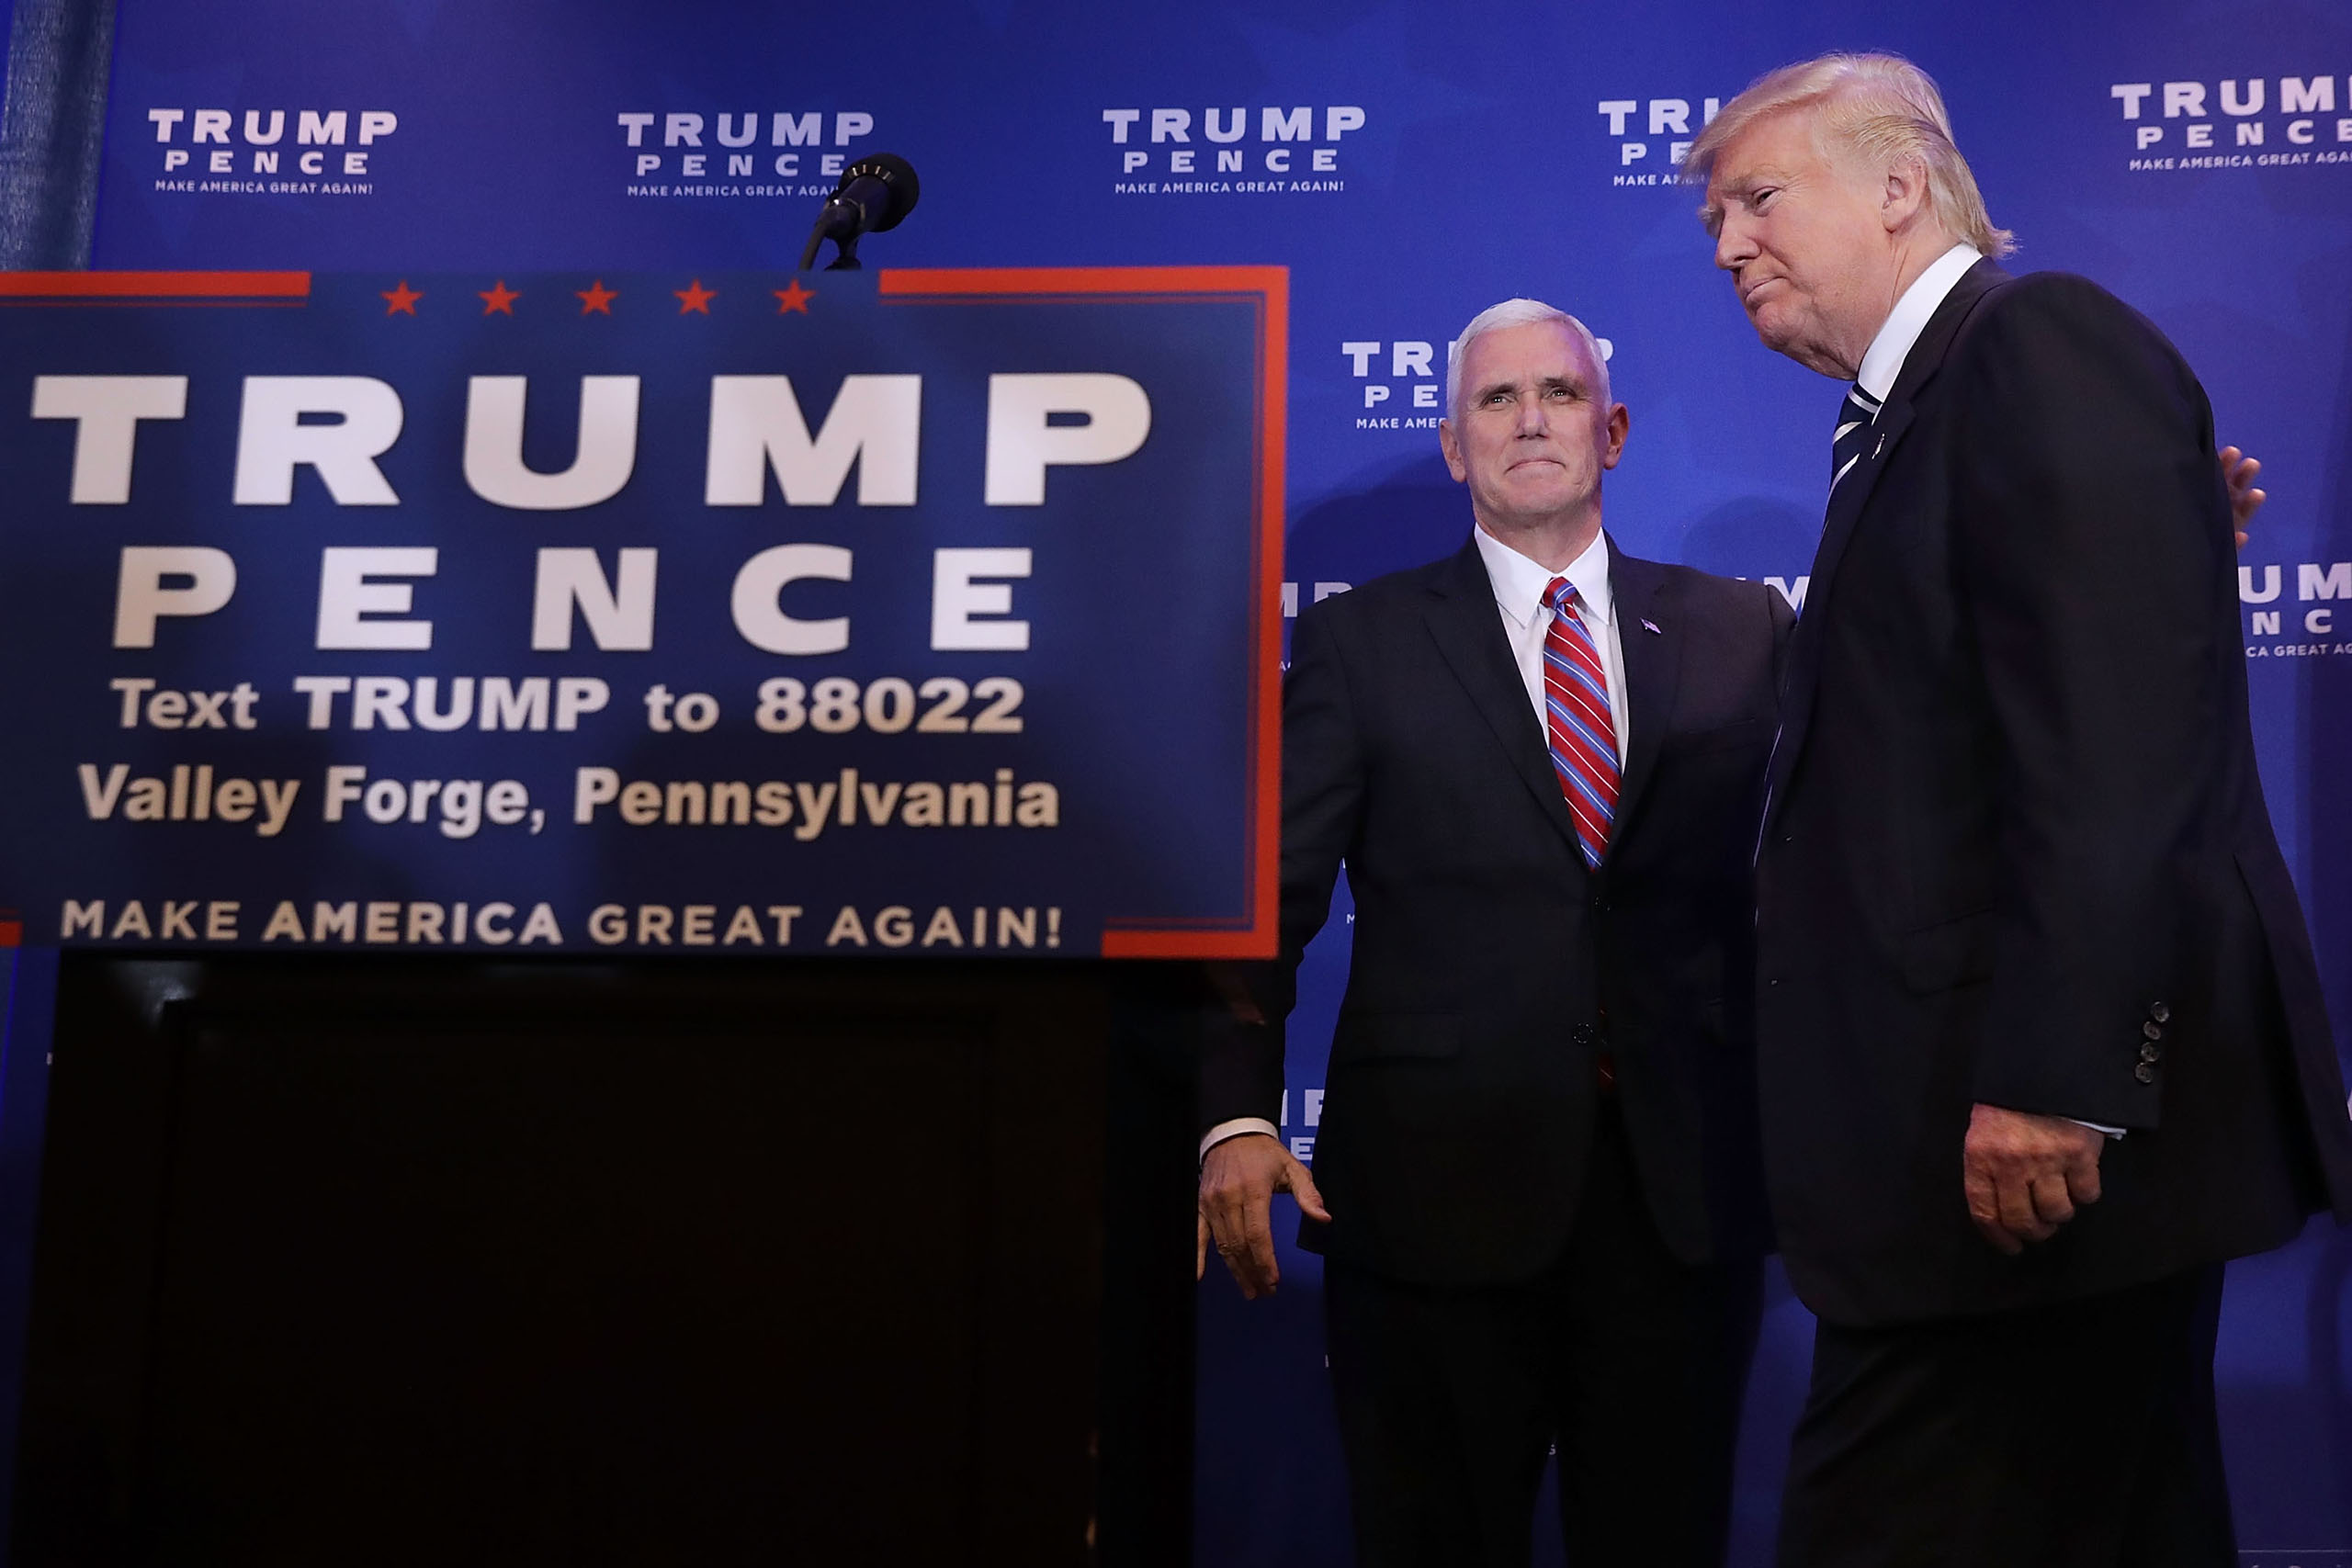 Donald Trump And Mike Pence Campaign Together In Pennsylvania